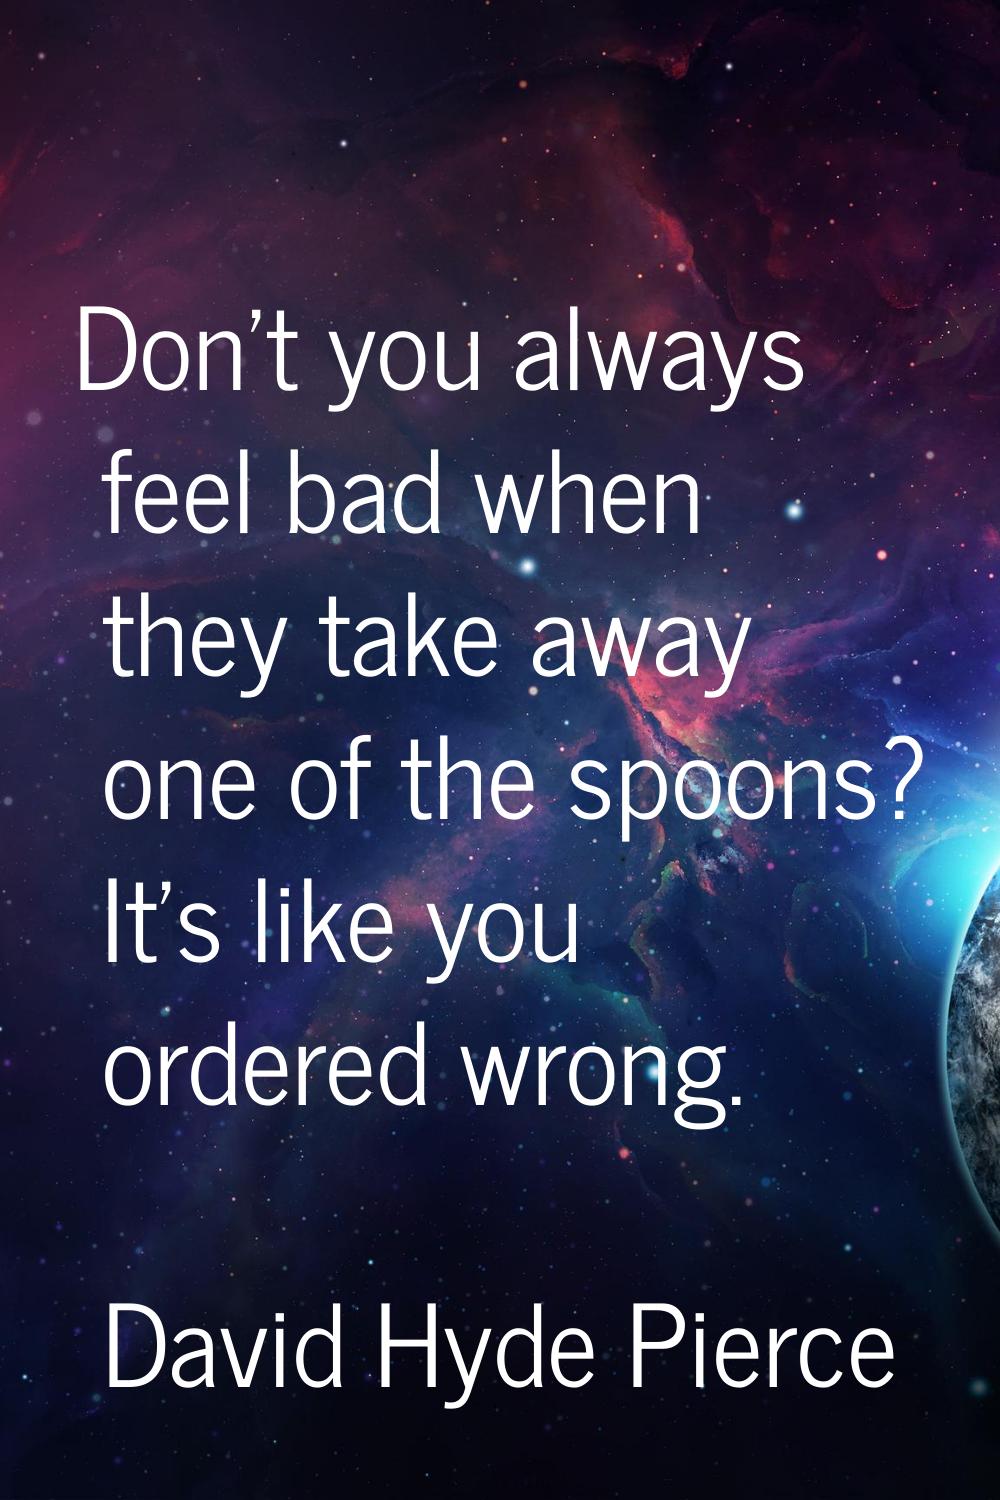 Don't you always feel bad when they take away one of the spoons? It's like you ordered wrong.